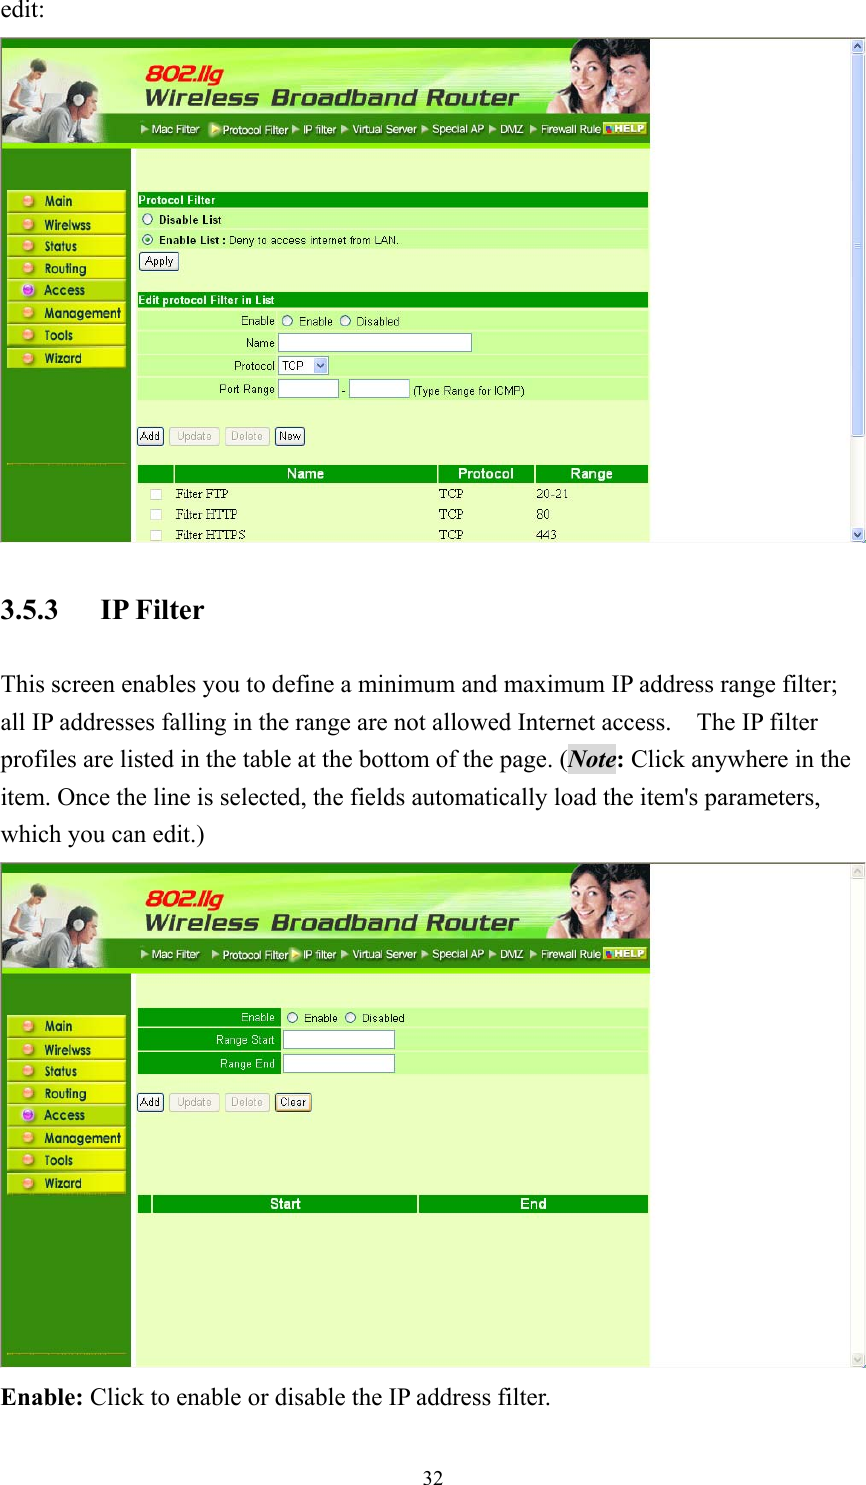  32edit:  3.5.3 IP Filter This screen enables you to define a minimum and maximum IP address range filter; all IP addresses falling in the range are not allowed Internet access.    The IP filter profiles are listed in the table at the bottom of the page. (Note: Click anywhere in the item. Once the line is selected, the fields automatically load the item&apos;s parameters, which you can edit.)  Enable: Click to enable or disable the IP address filter. 